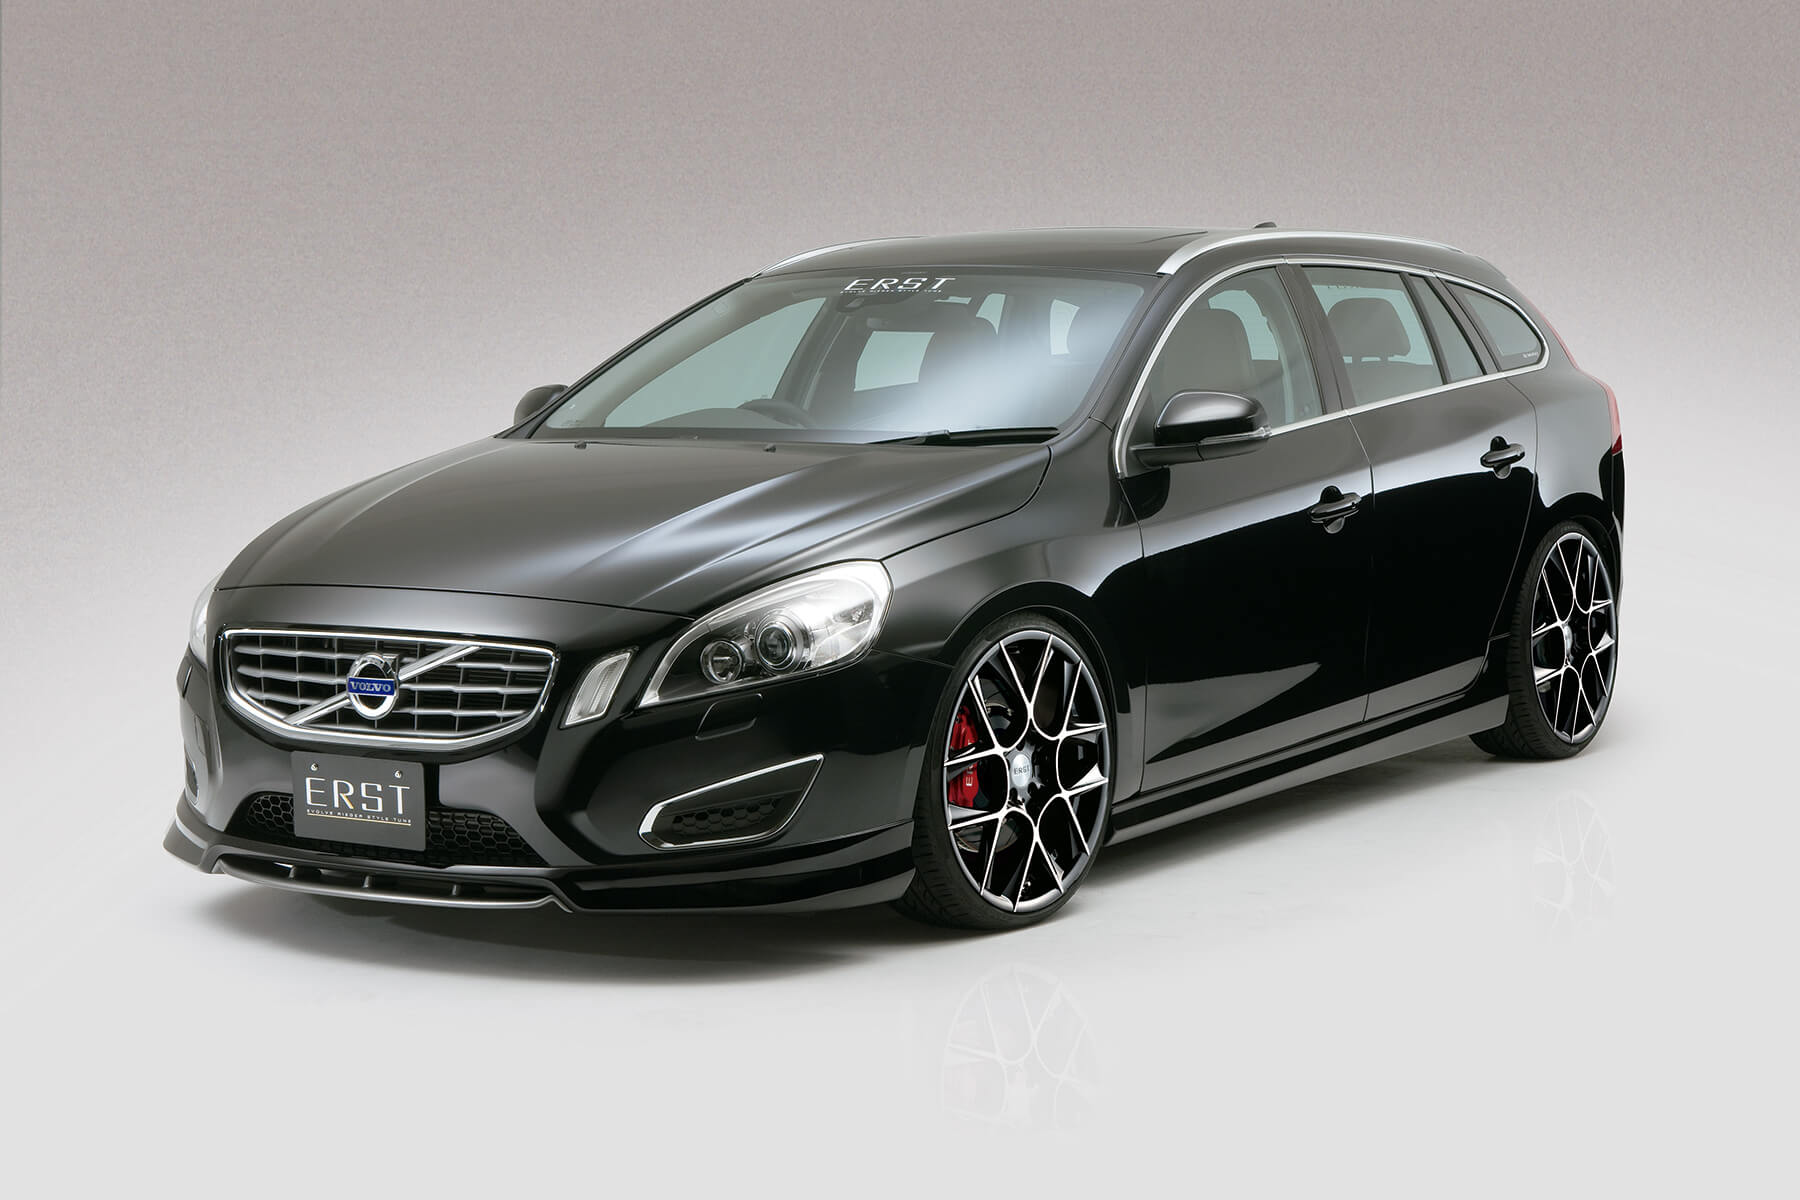 WHEELS | ERST Tuner for the VOLVO